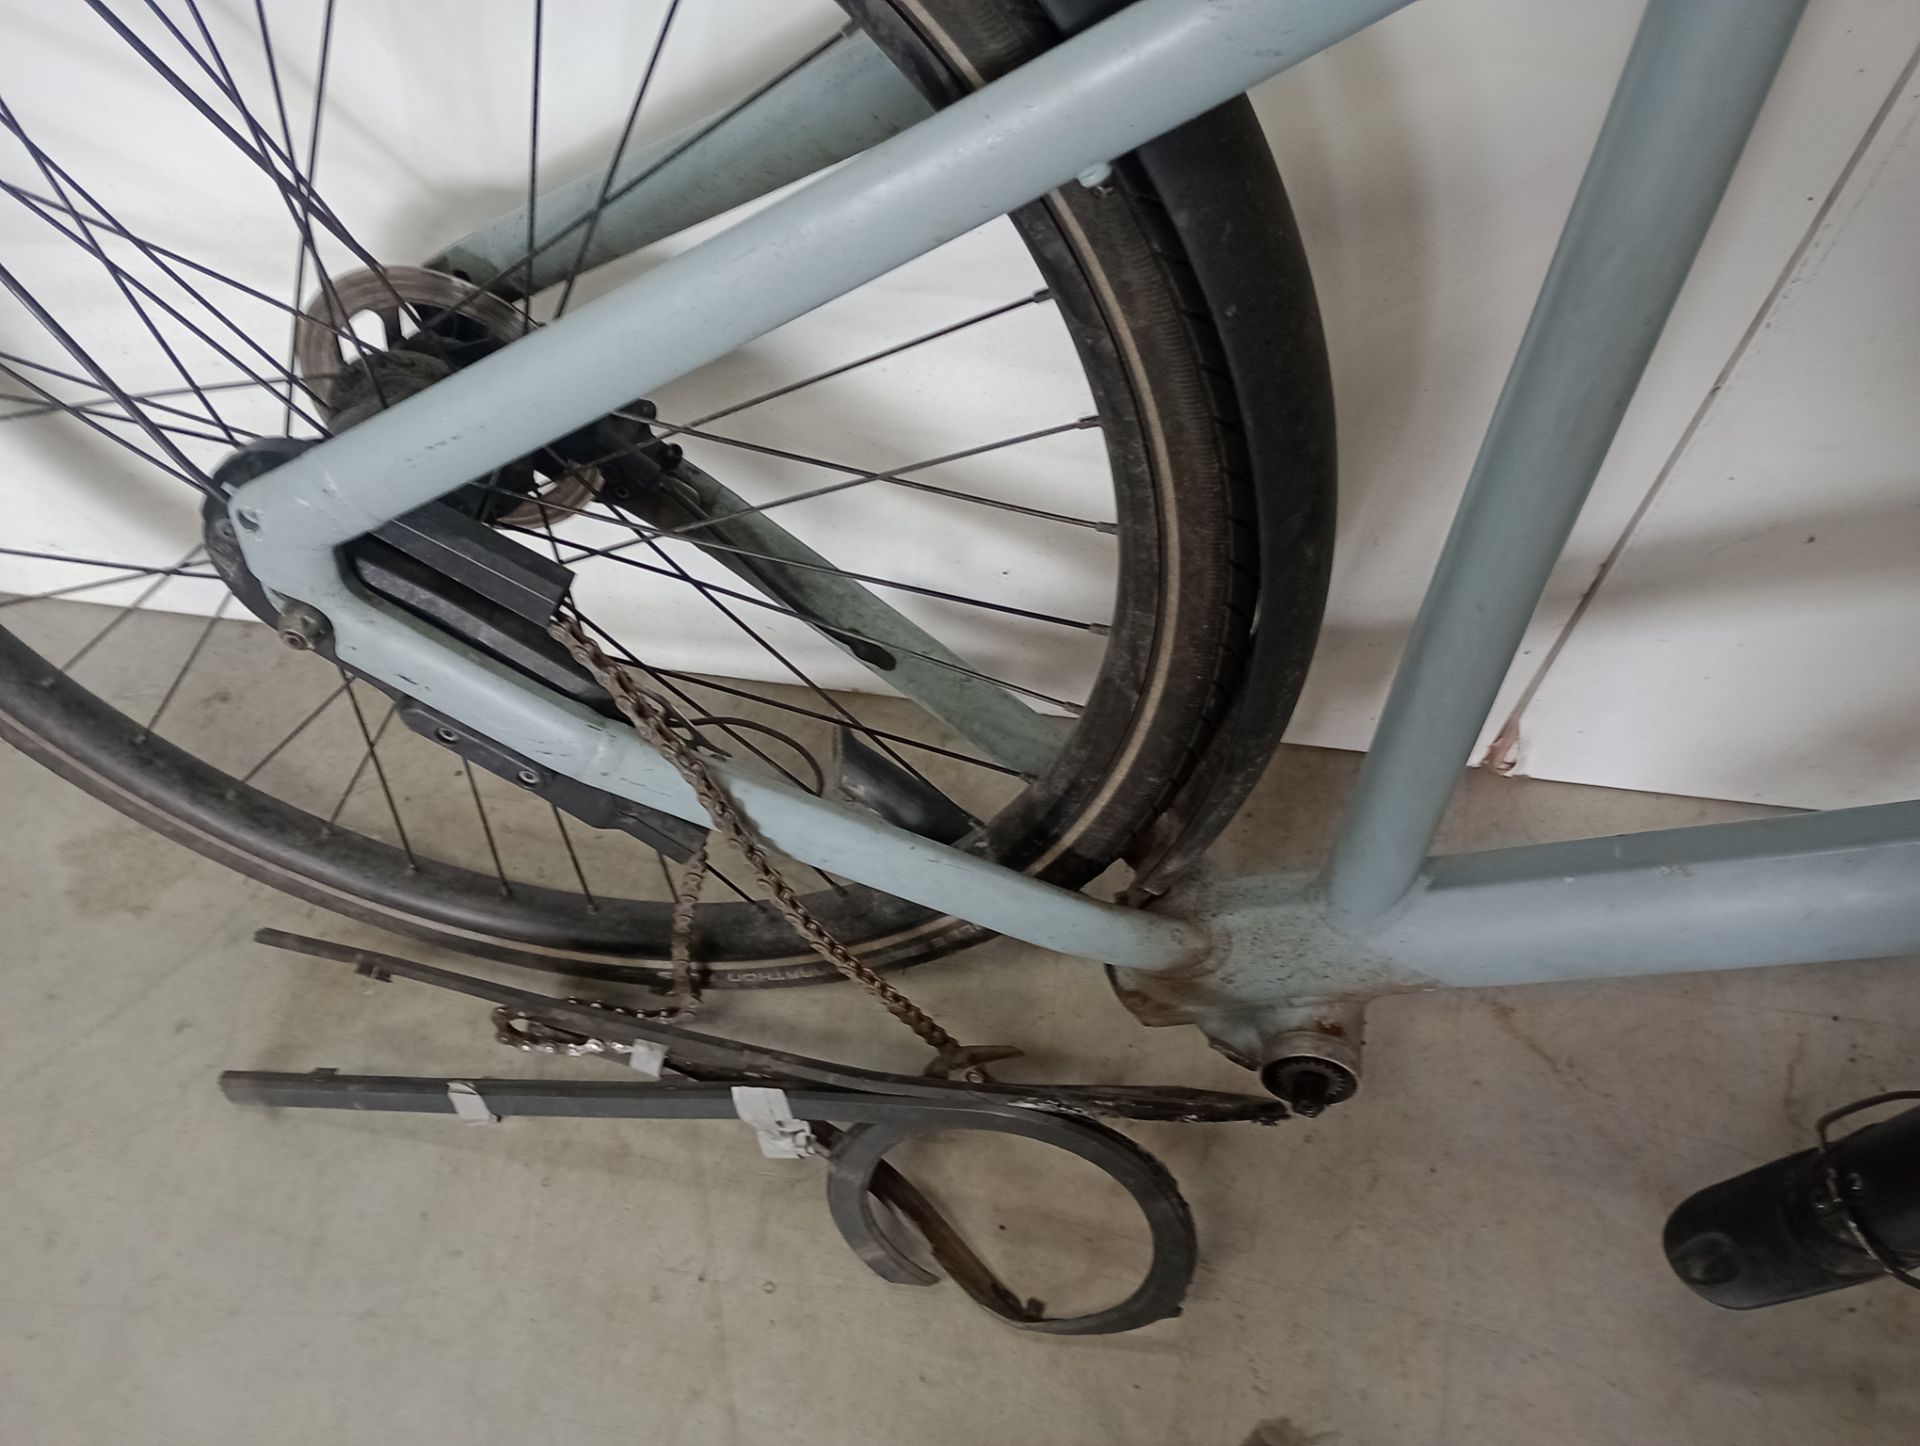 VanMoof S3 Electric Bike, Frame Number ASY3102971 (NOT ROADWORTHY - FOR SPARES ONLY) (No codes - Image 2 of 3